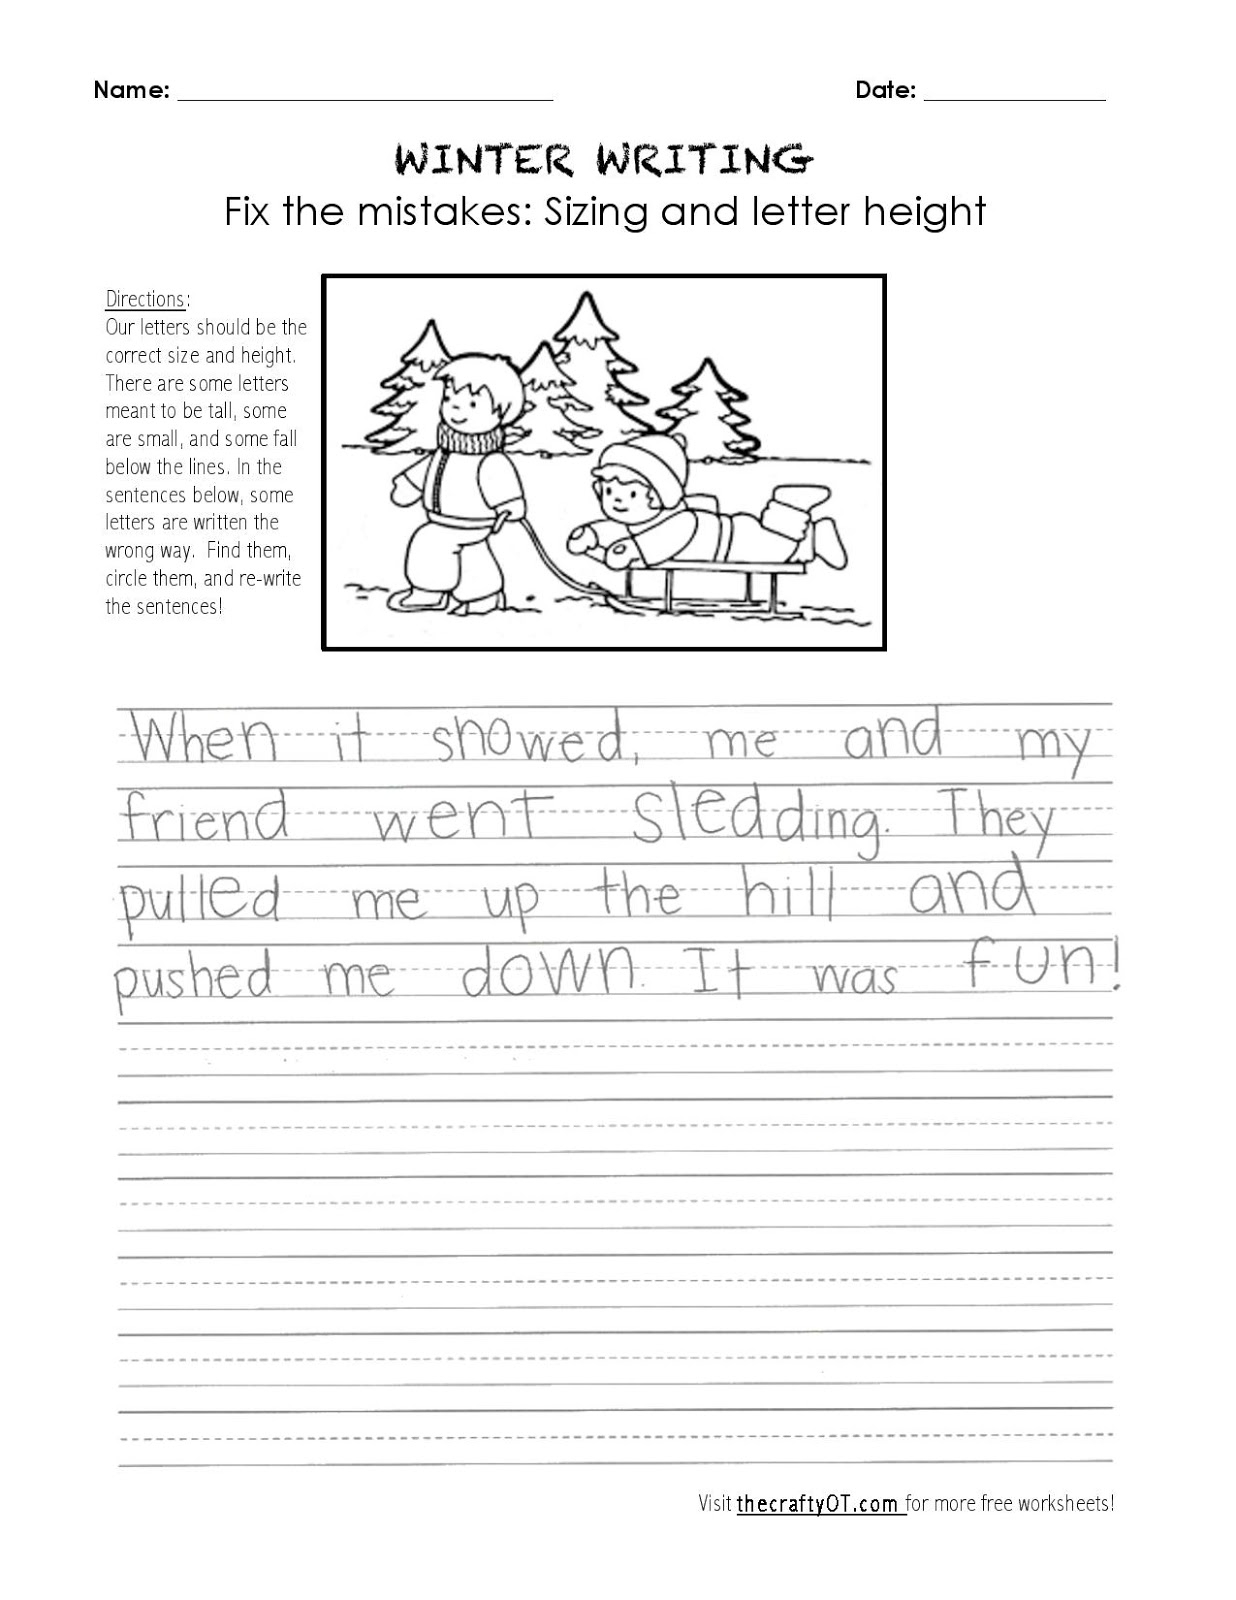 The Crafty OT Winter Writing Fix The Mistakes